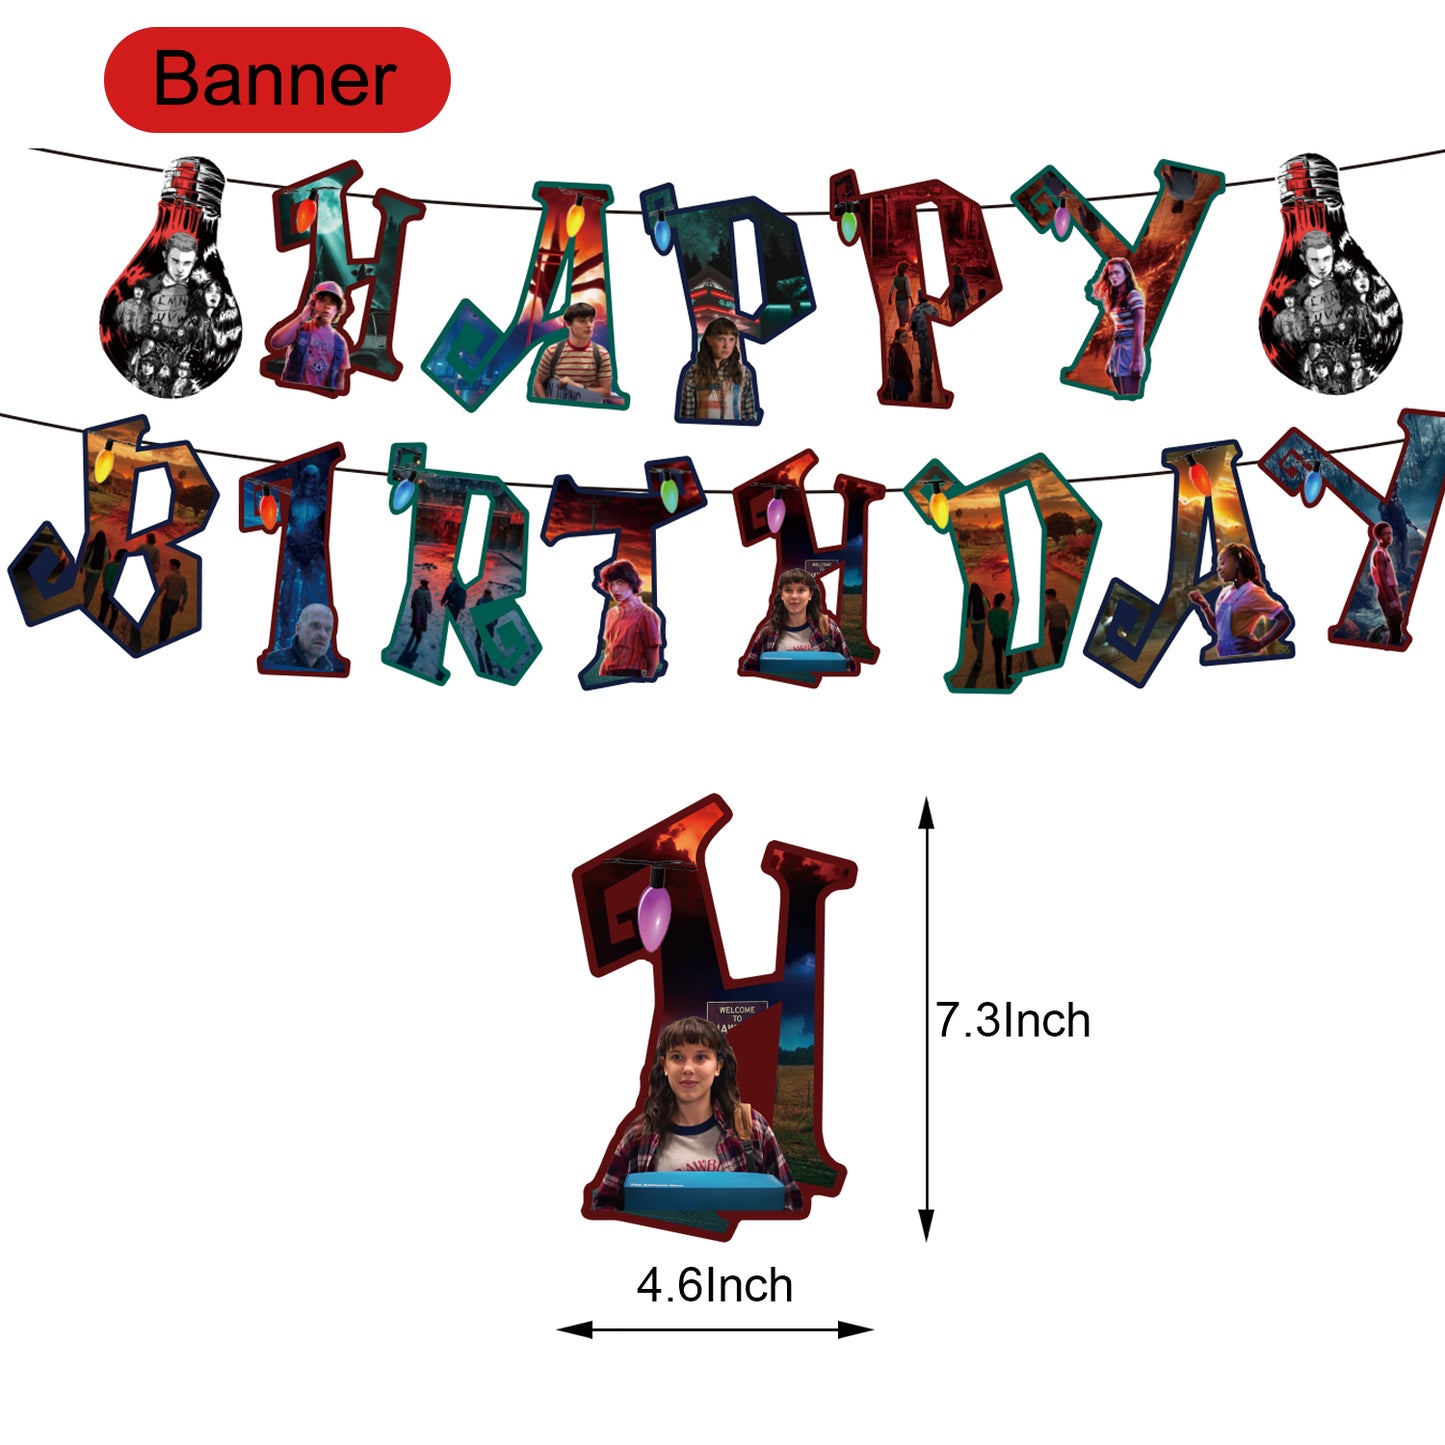 Stranger Things Birthday Party Decorations - Party Corner - BM Trading